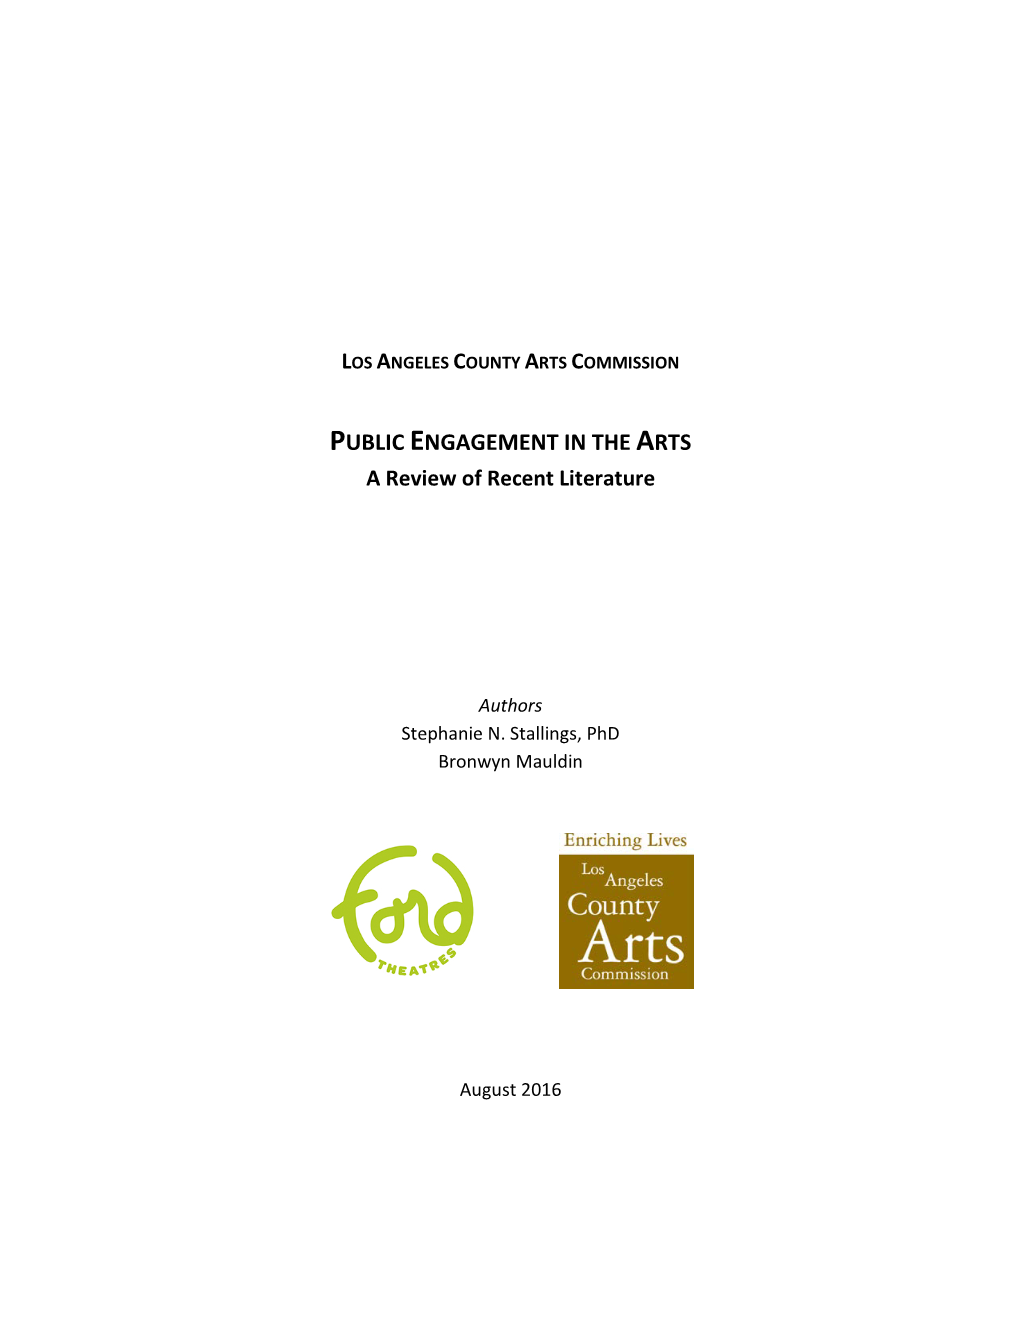 PUBLIC ENGAGEMENT in the ARTS a Review of Recent Literature